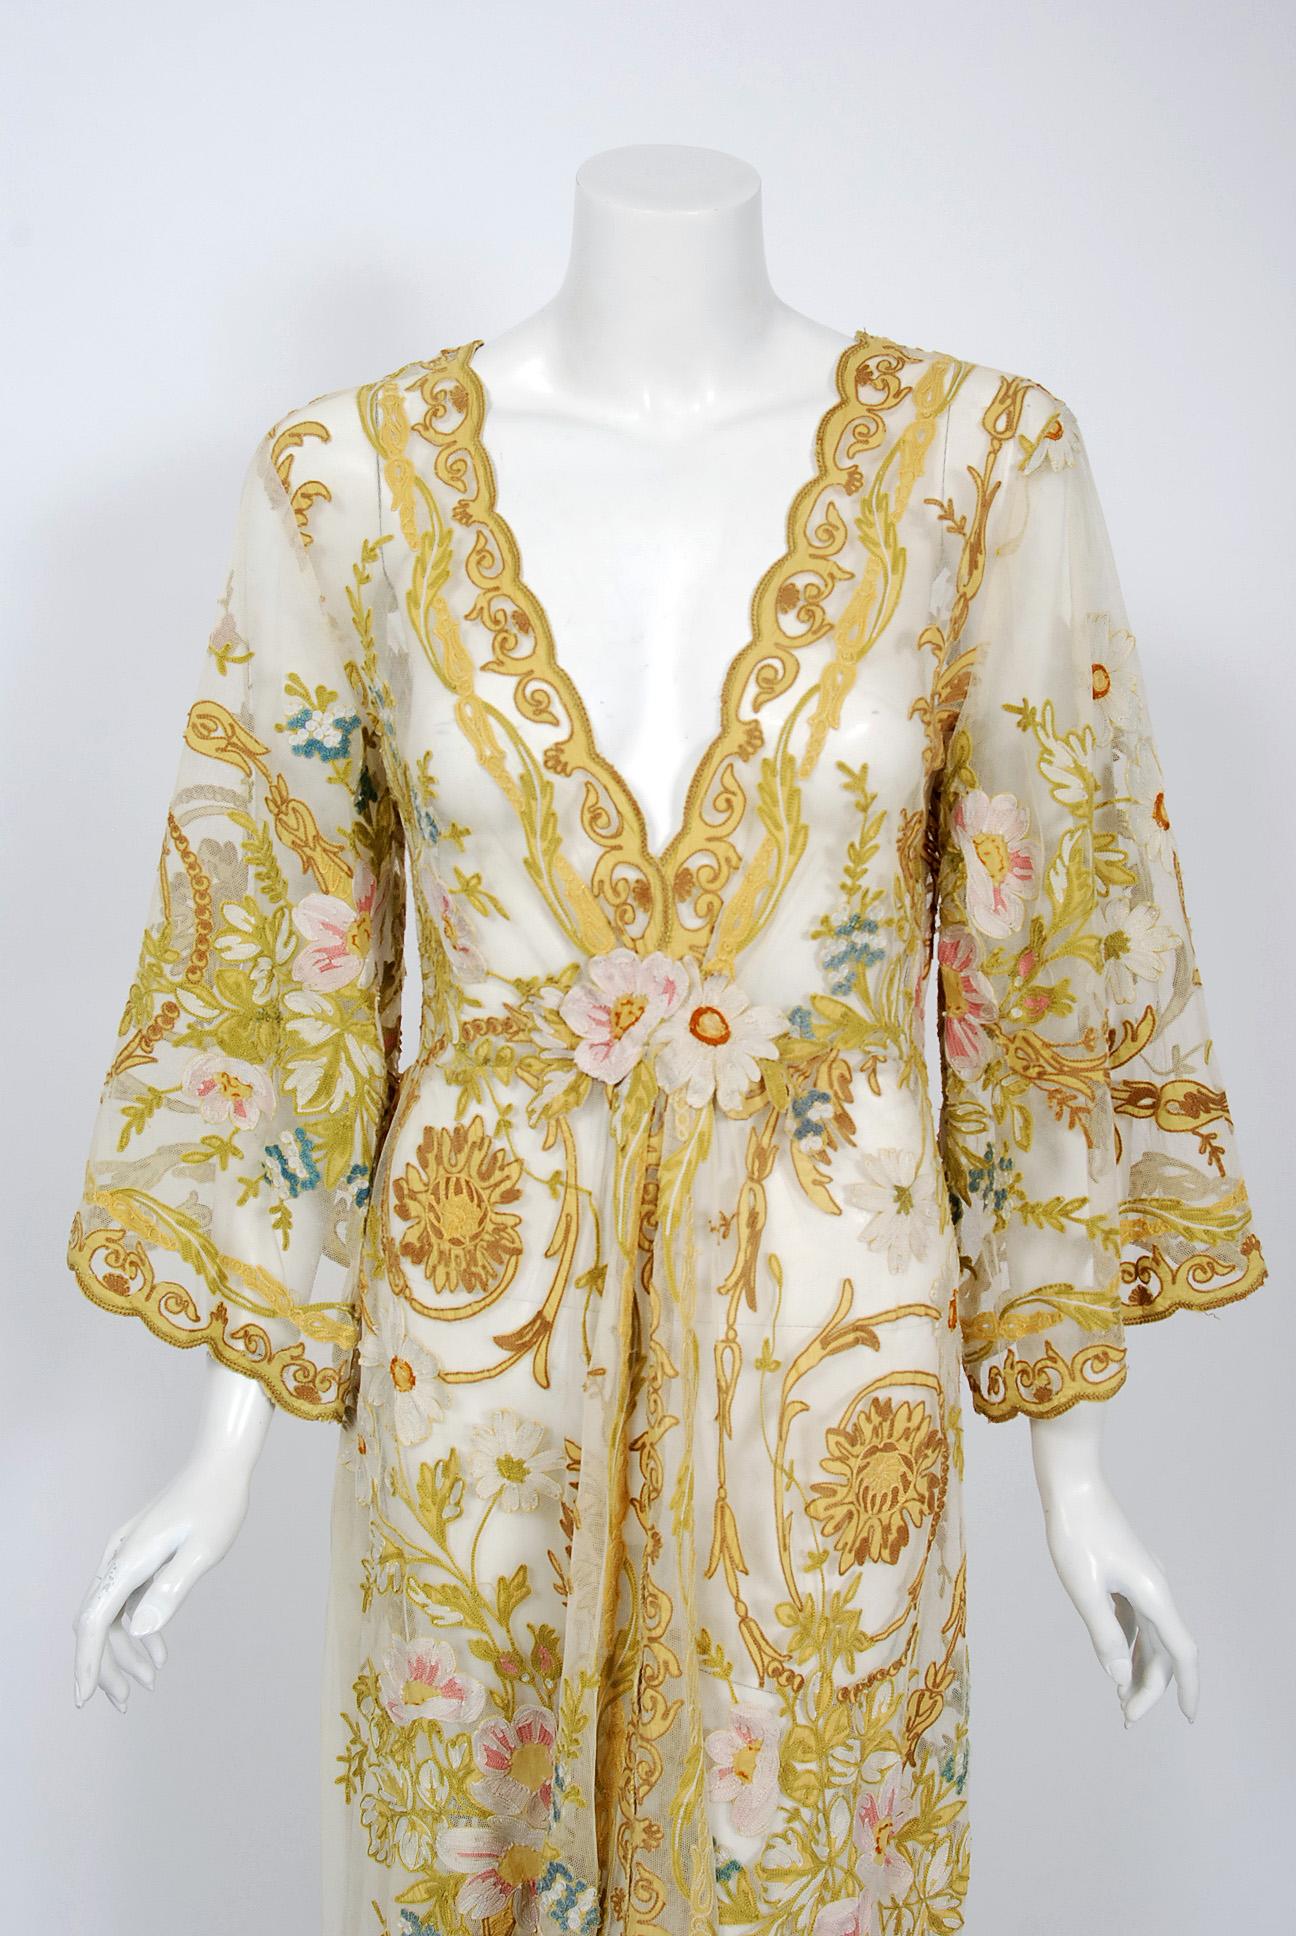 With its gorgeous embroidered floral motif and breathtaking silhouette, this rare 1930's boudior lounge gown makes a memorable impression. It has the most flattering cut with wide 3/4-length sleeves and low-cut plunge. I particularly love the